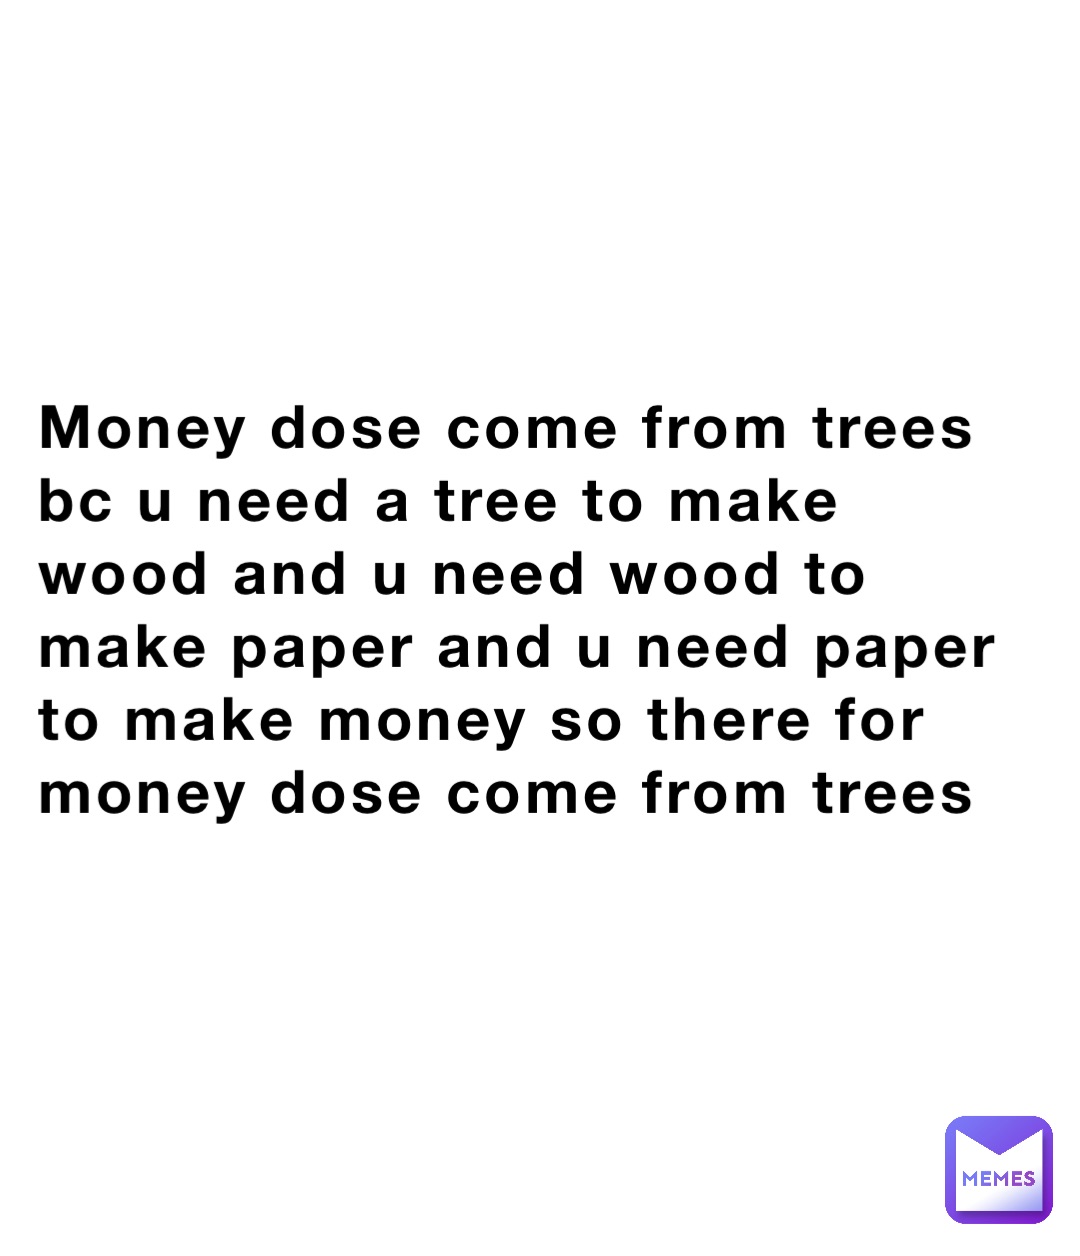 Money dose come from trees bc u need a tree to make wood and u need wood to make paper and u need paper to make money so there for money dose come from trees